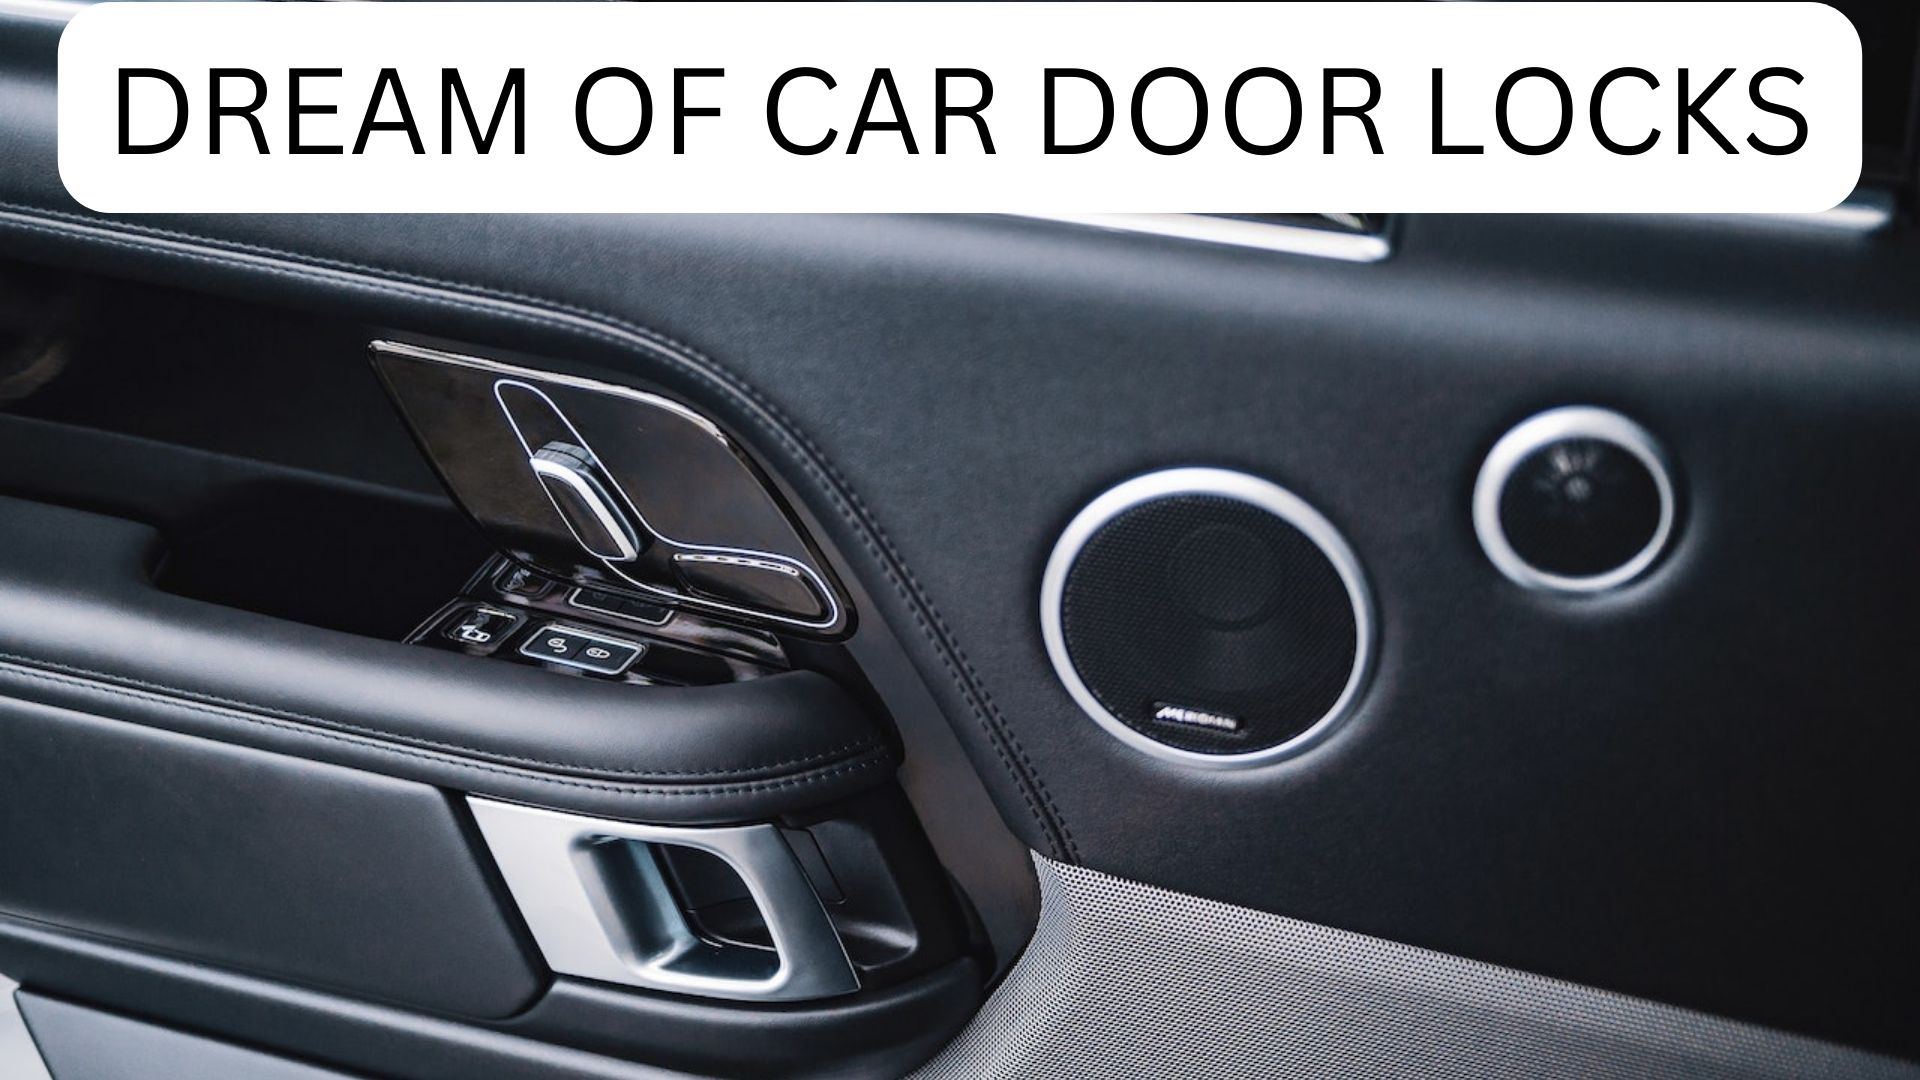 Dream Of Car Door Locks - Feelings Of Safety While In Control